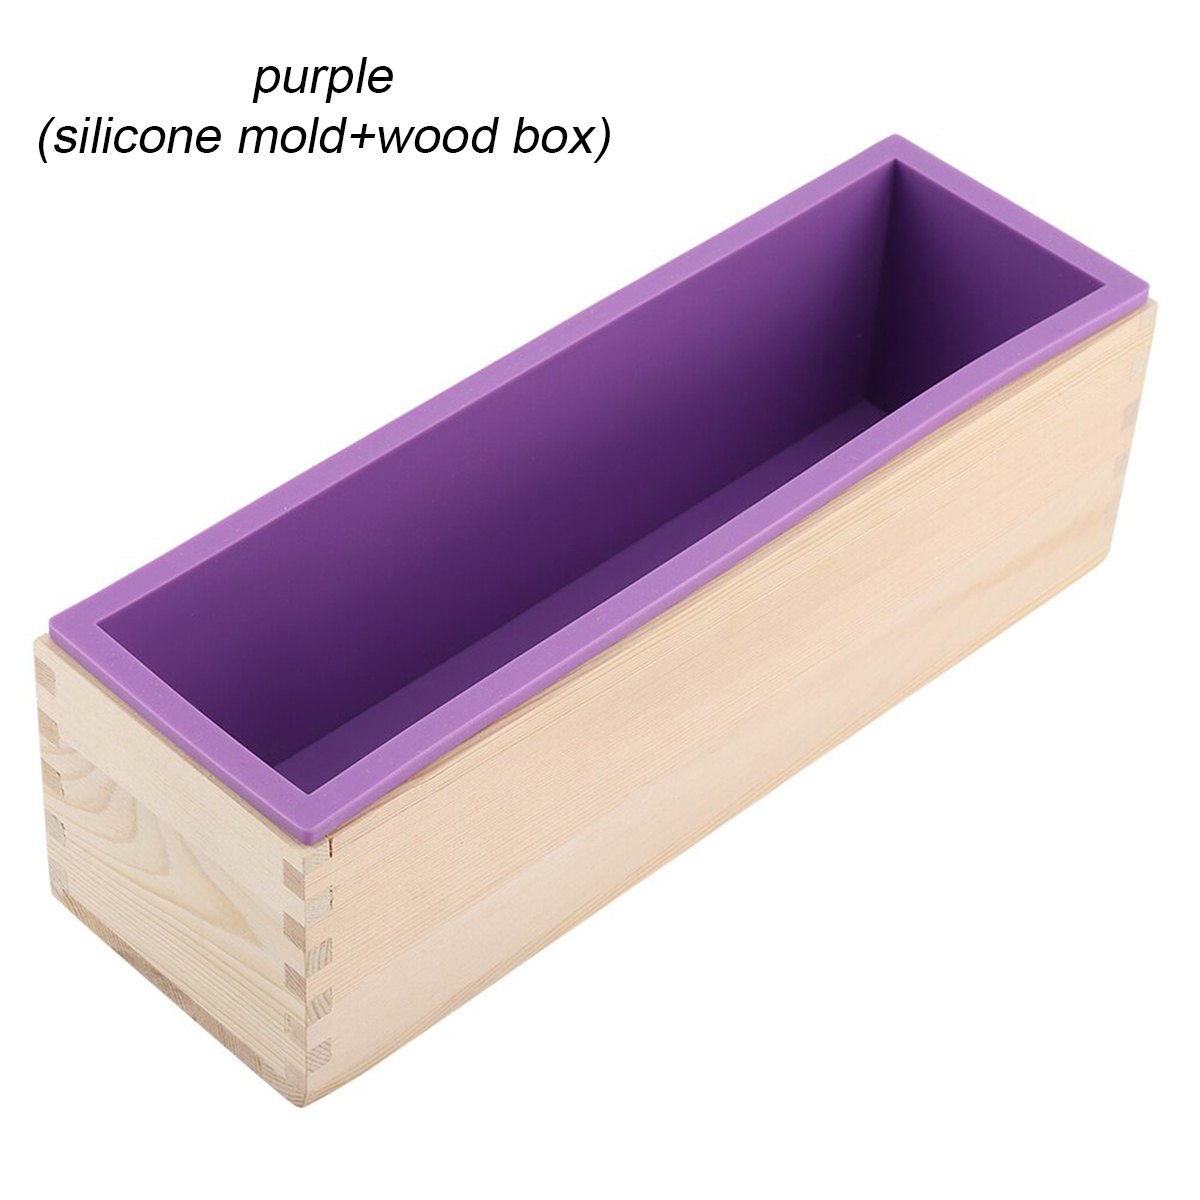 New-Wood-Loaf-Soap-Mould-with-Silicone-Mold-Cake-Making-Wooden-Box-Soap-1602226-8